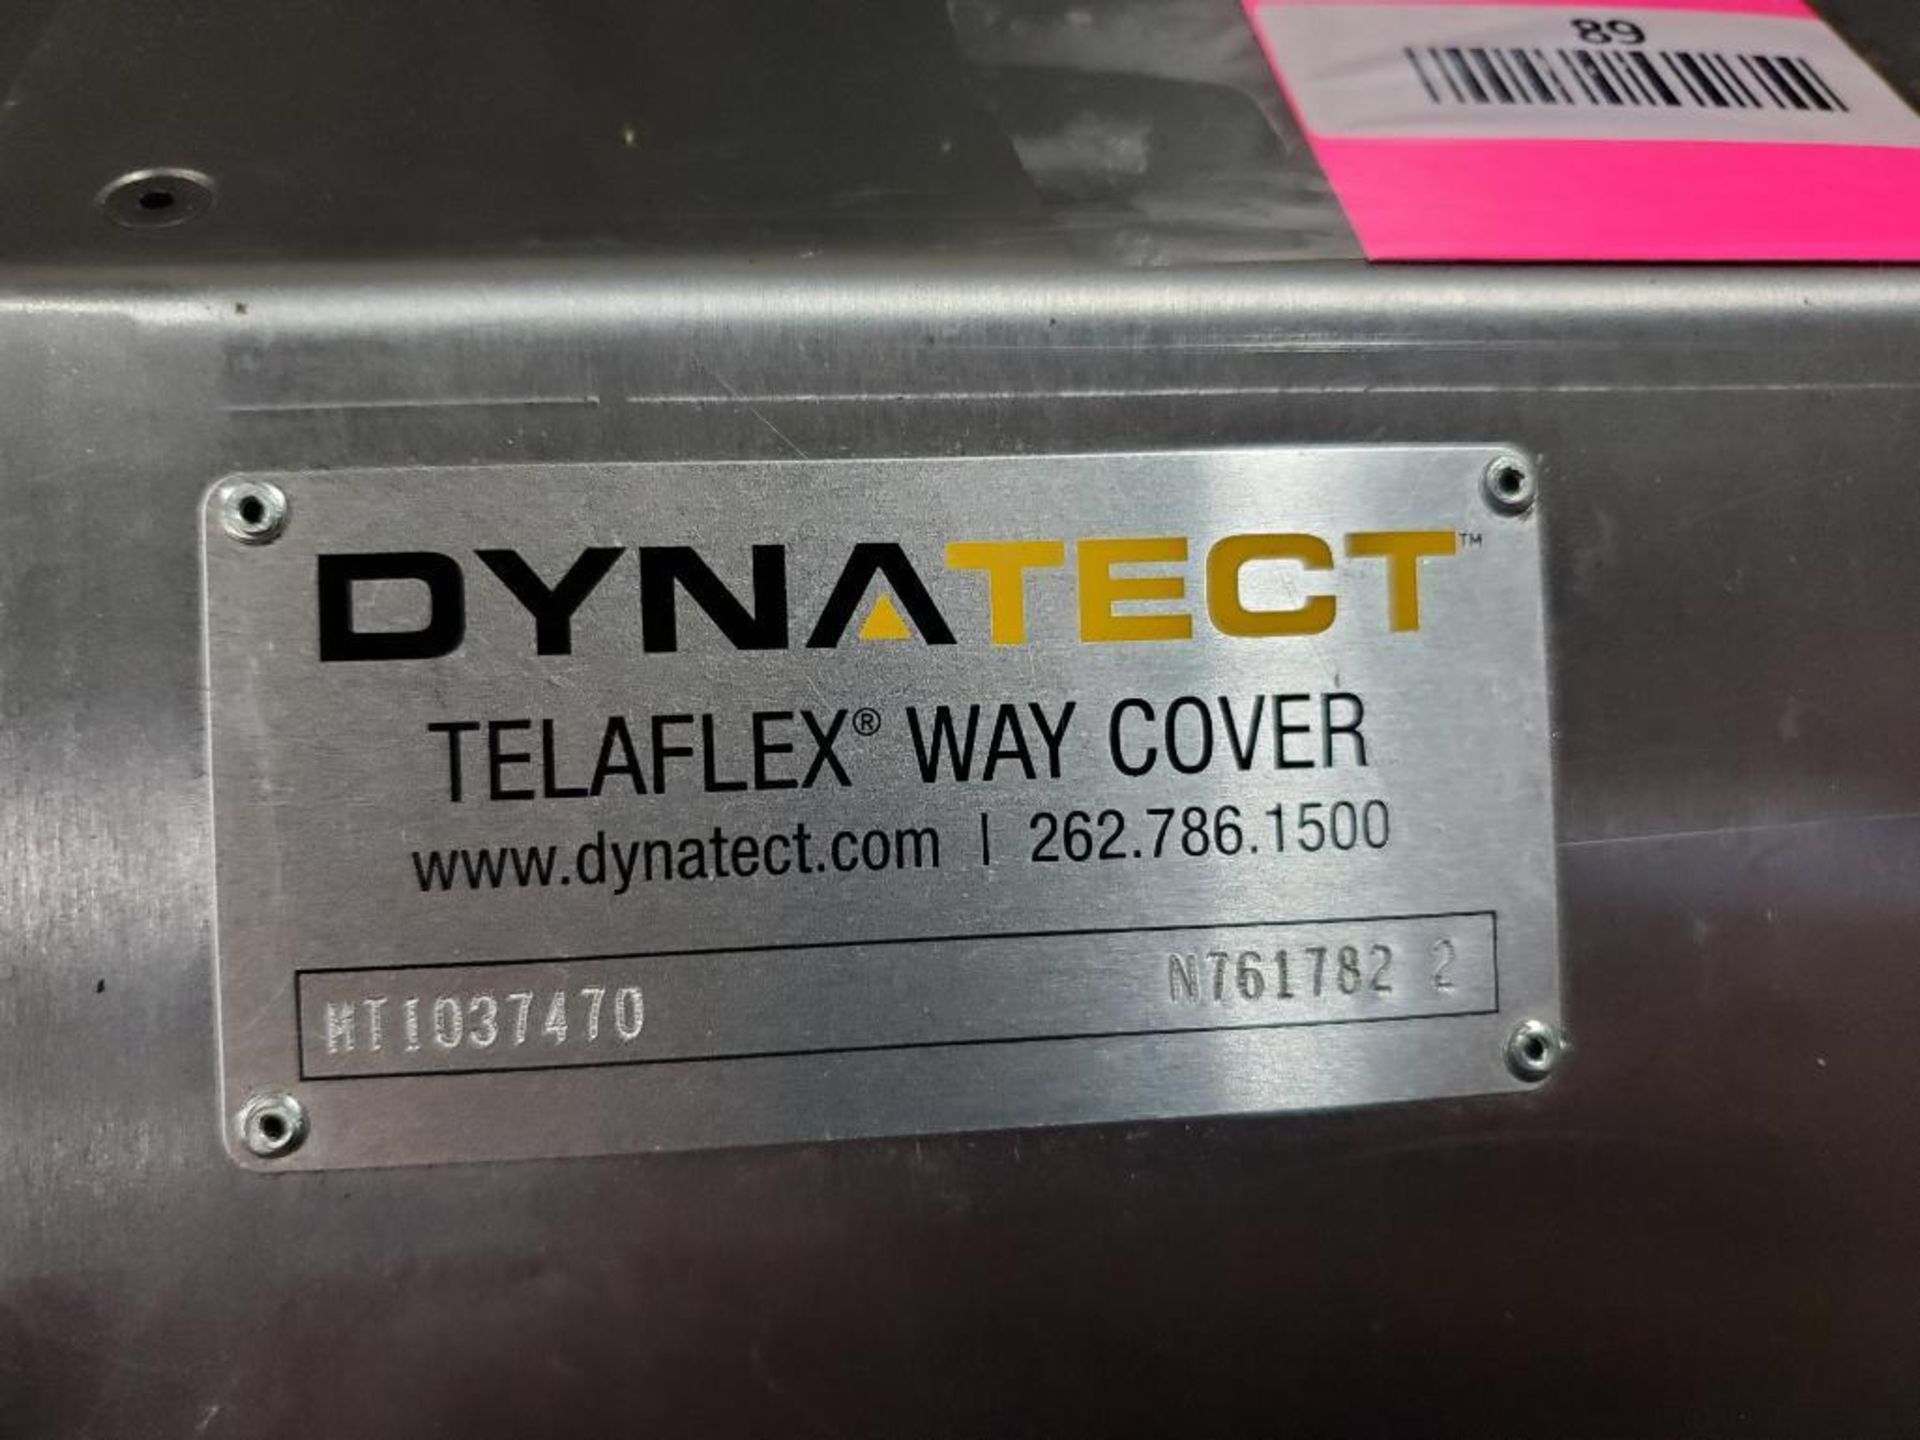 Dynatect Teleflex way cover. N761782-2. - Image 2 of 6